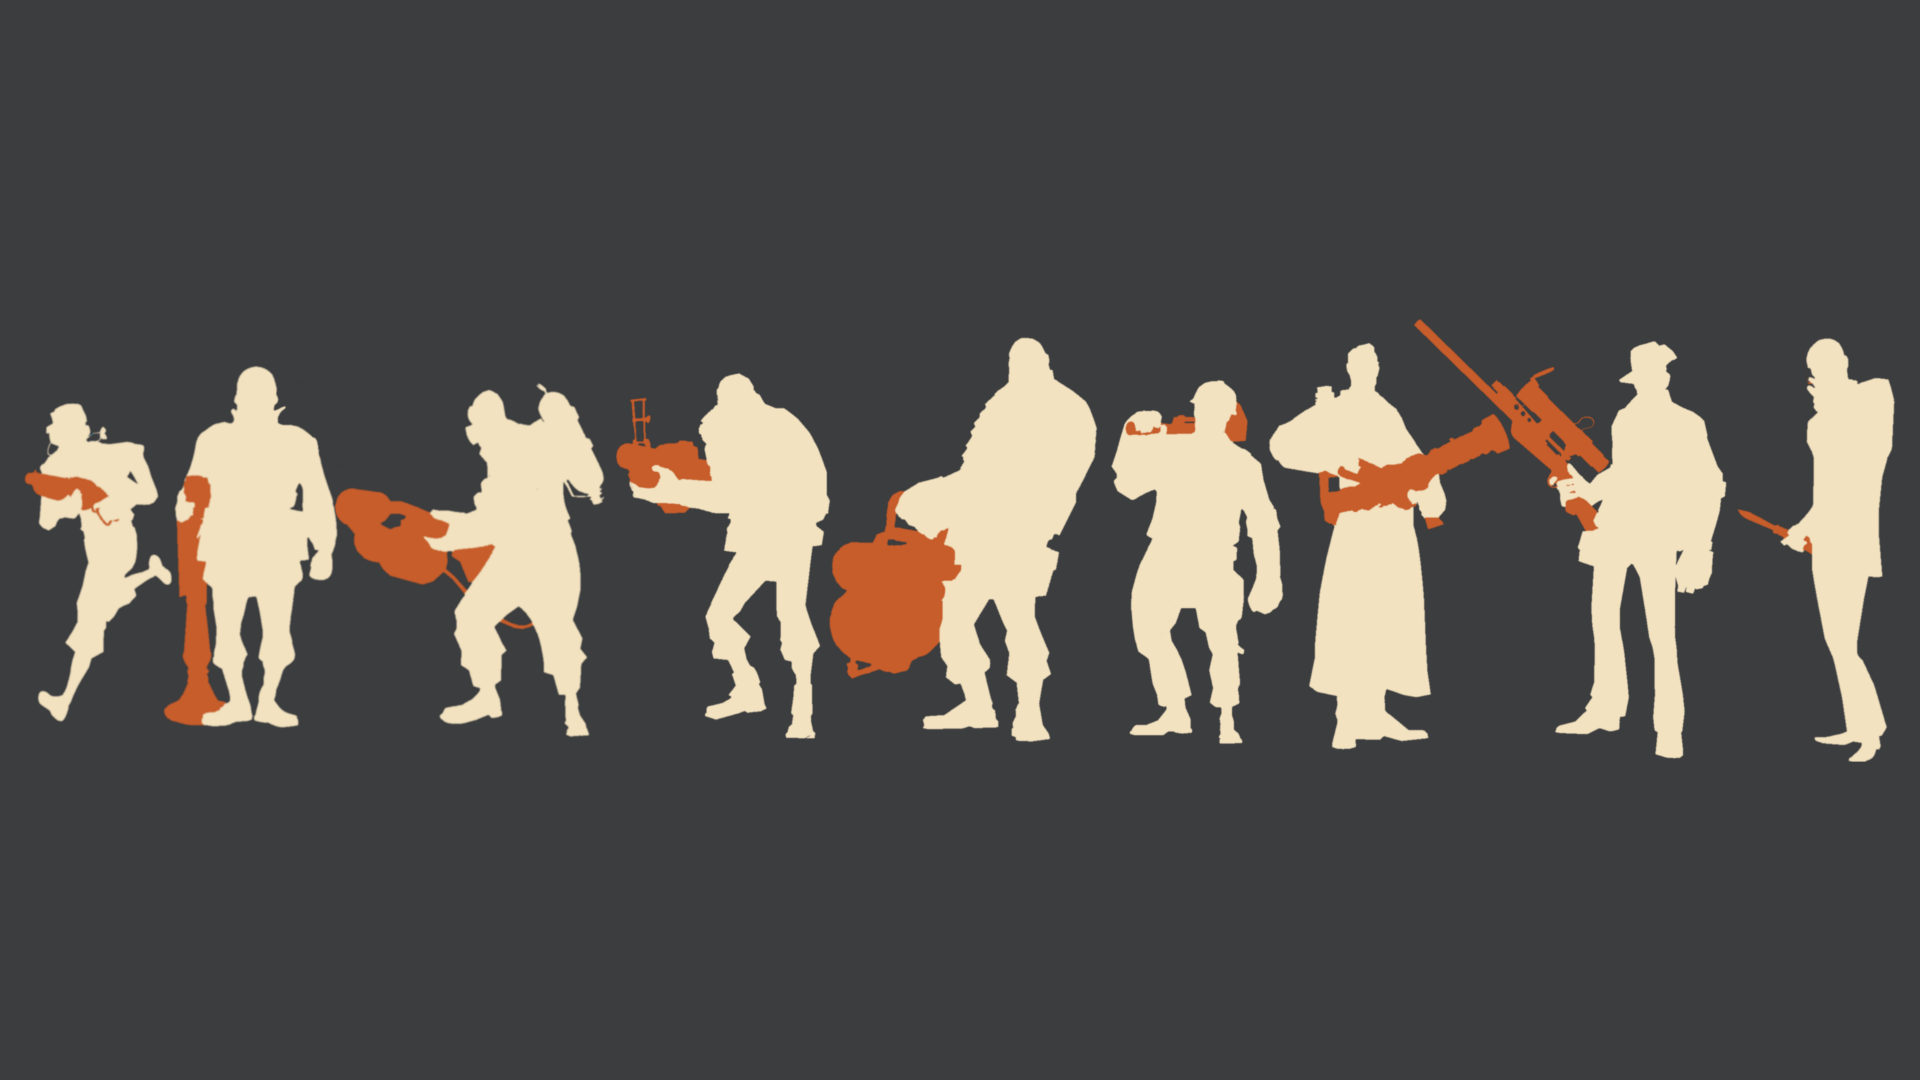 General 1920x1080 Team Fortress 2 minimalism Scout (TF2) Soldier (TF2) Pyro (TF2) Heavy (TF2) Engineer (TF2) Medic (TF2) Sniper (TF2) Spy (TF2) PC gaming simple background gray background